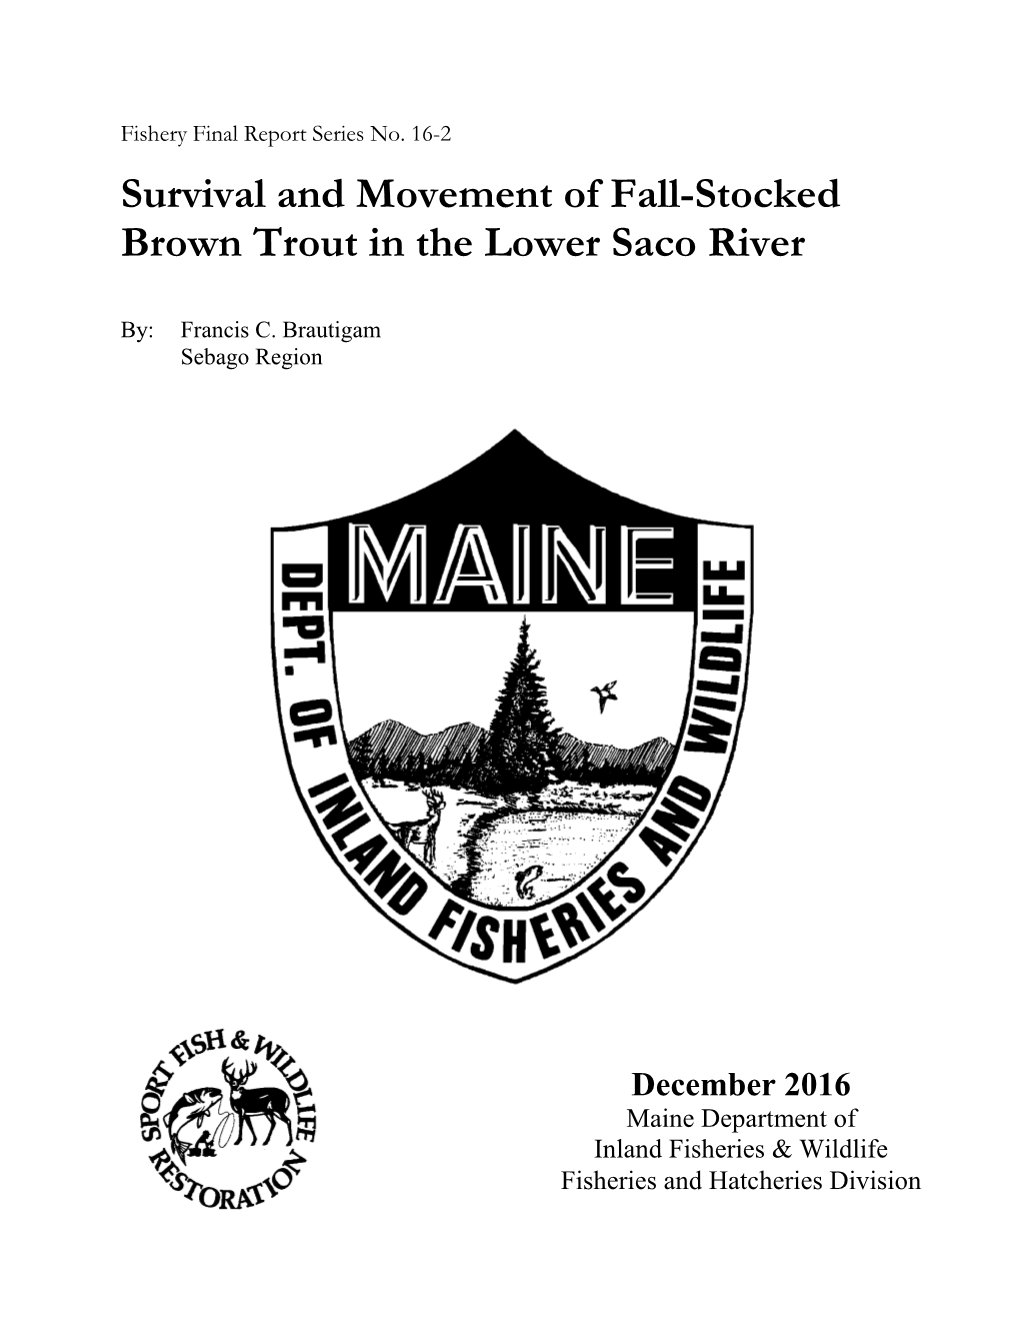 Survival and Movement of Fall-Stocked Brown Trout in the Lower Saco River